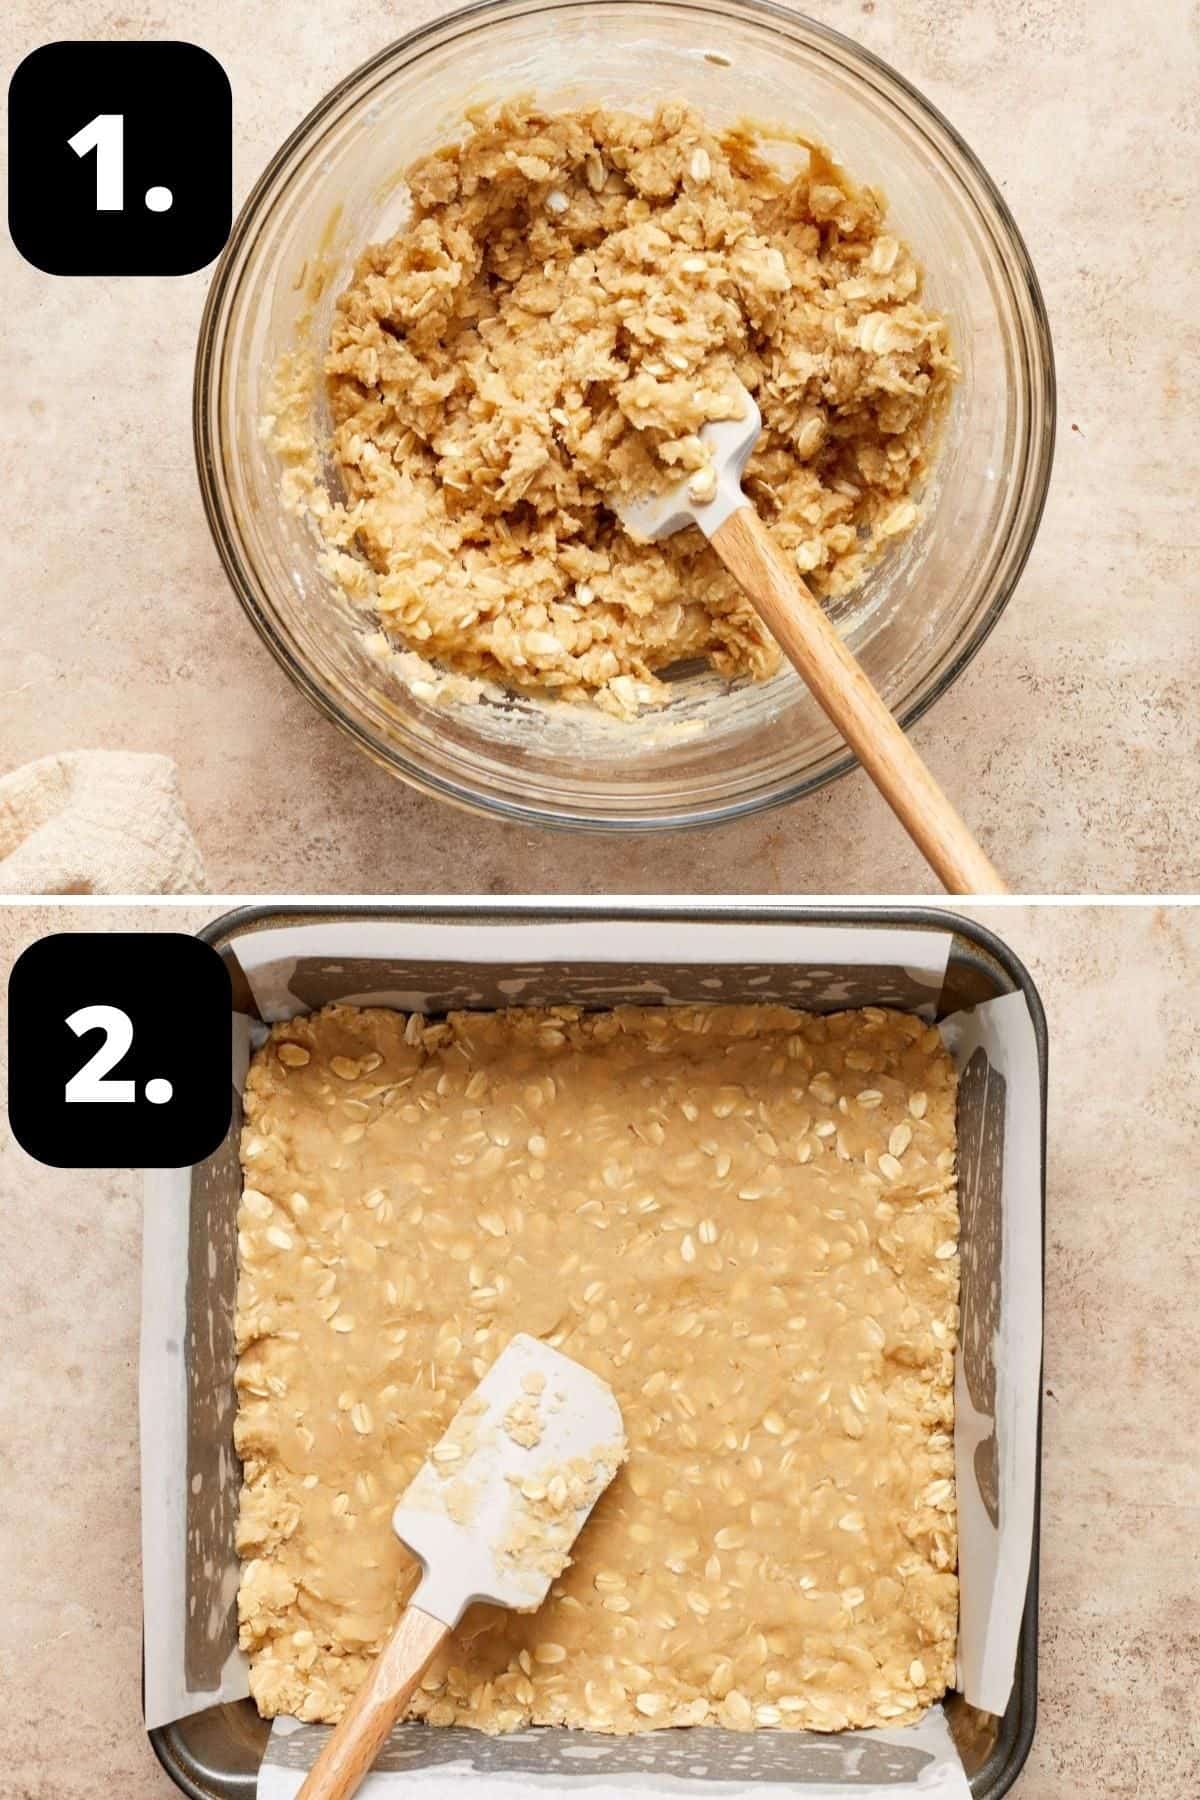 Steps 1-2 of preparing this recipe - the oatmeal mixture in a glass bowl, and pressing down the base in a baking tin.